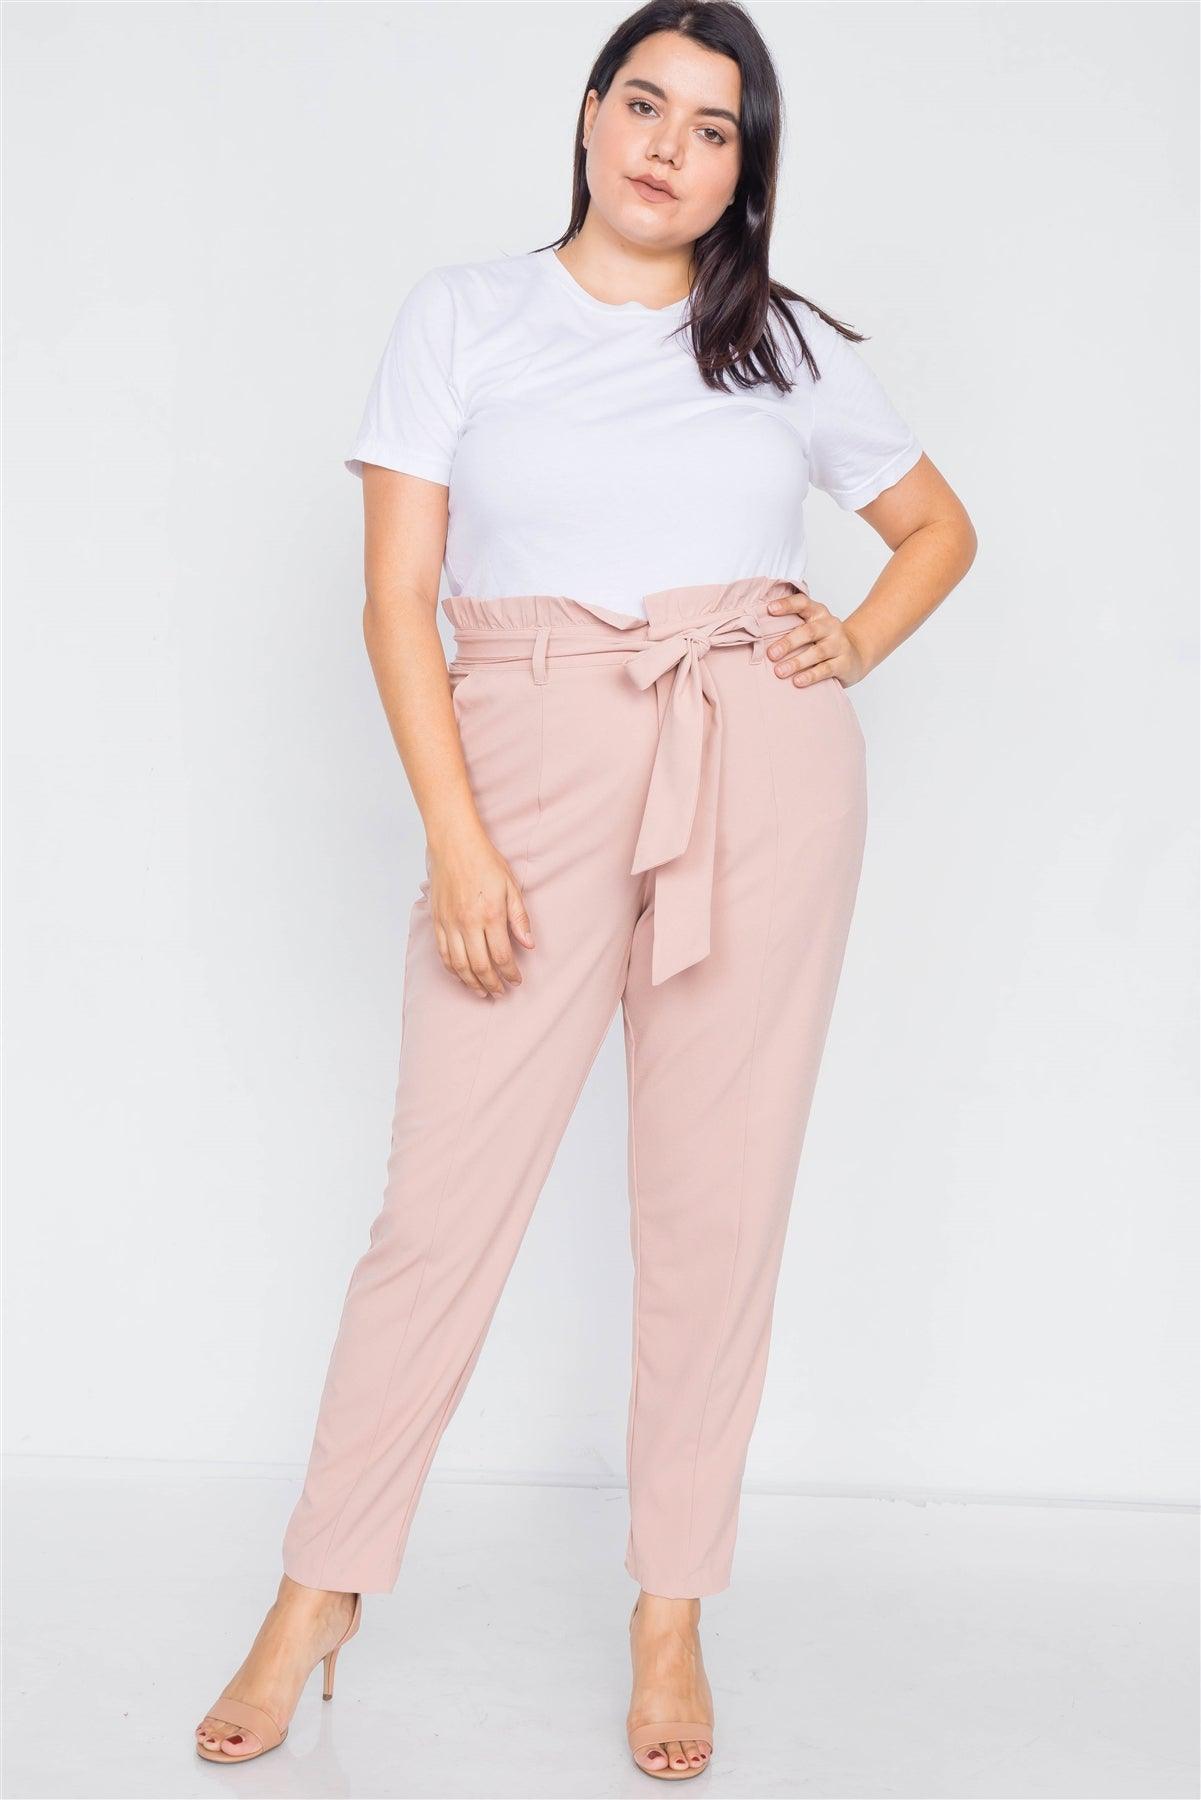 Plus Size Mauve Ruched High-Waist Chic Pleated Pants /3-2-1